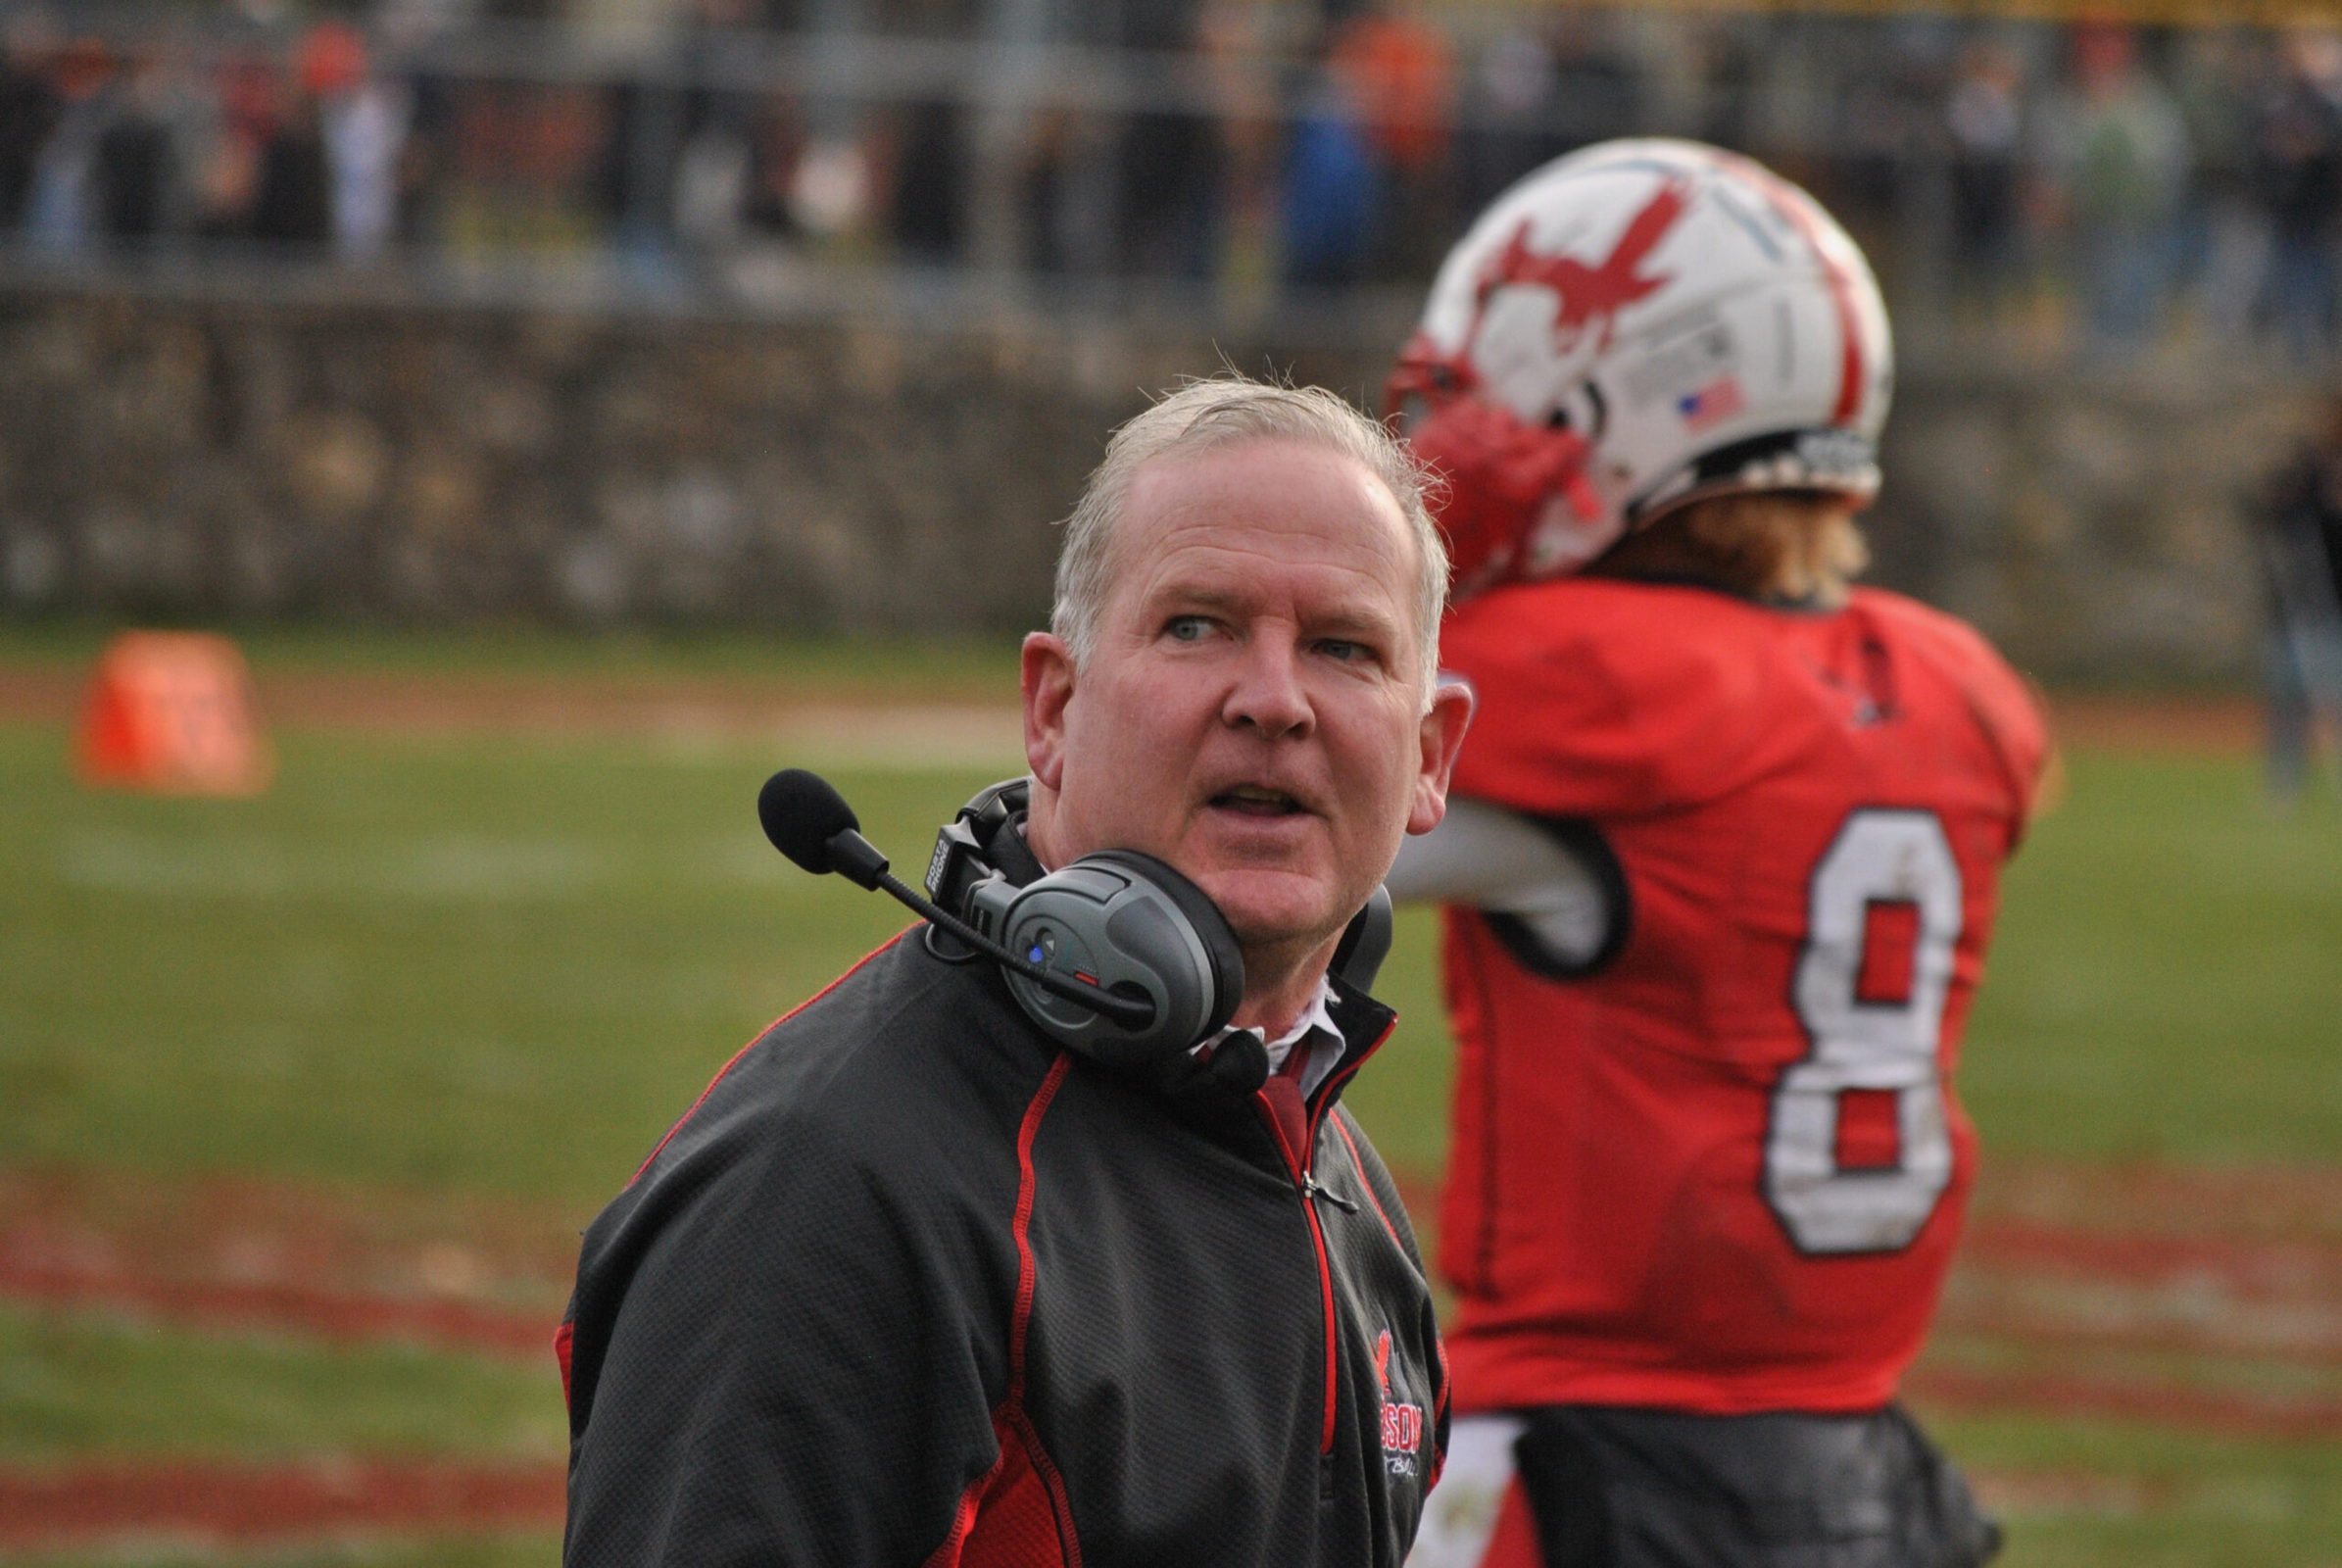 ‘The whole town of Hudson is going to miss him:’ Hudson football coach retires